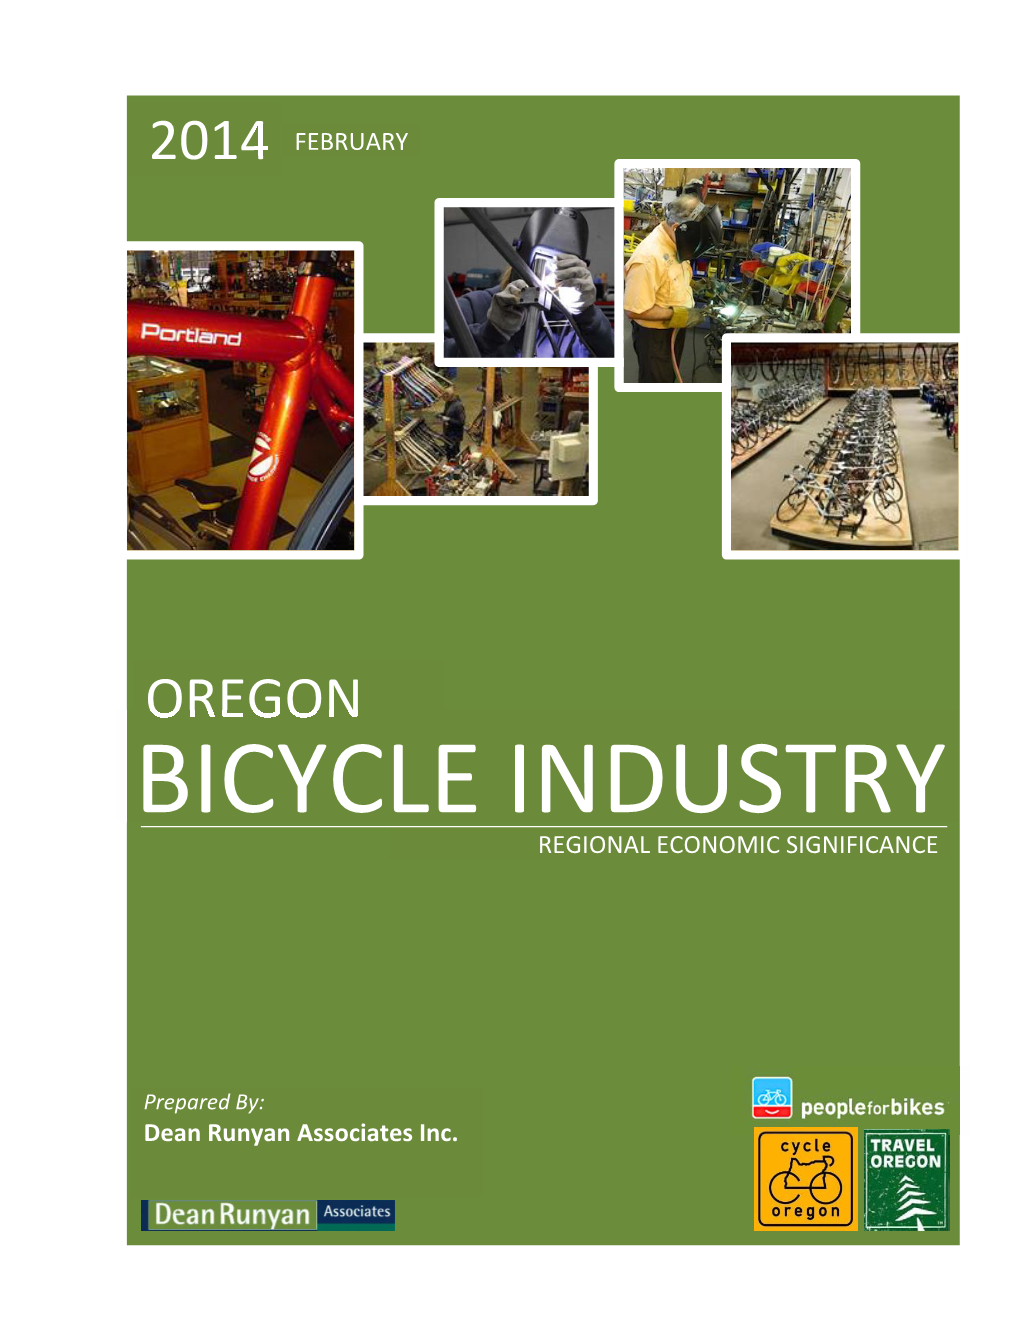 Oregon Bicycle Industry Regional Economic Significance